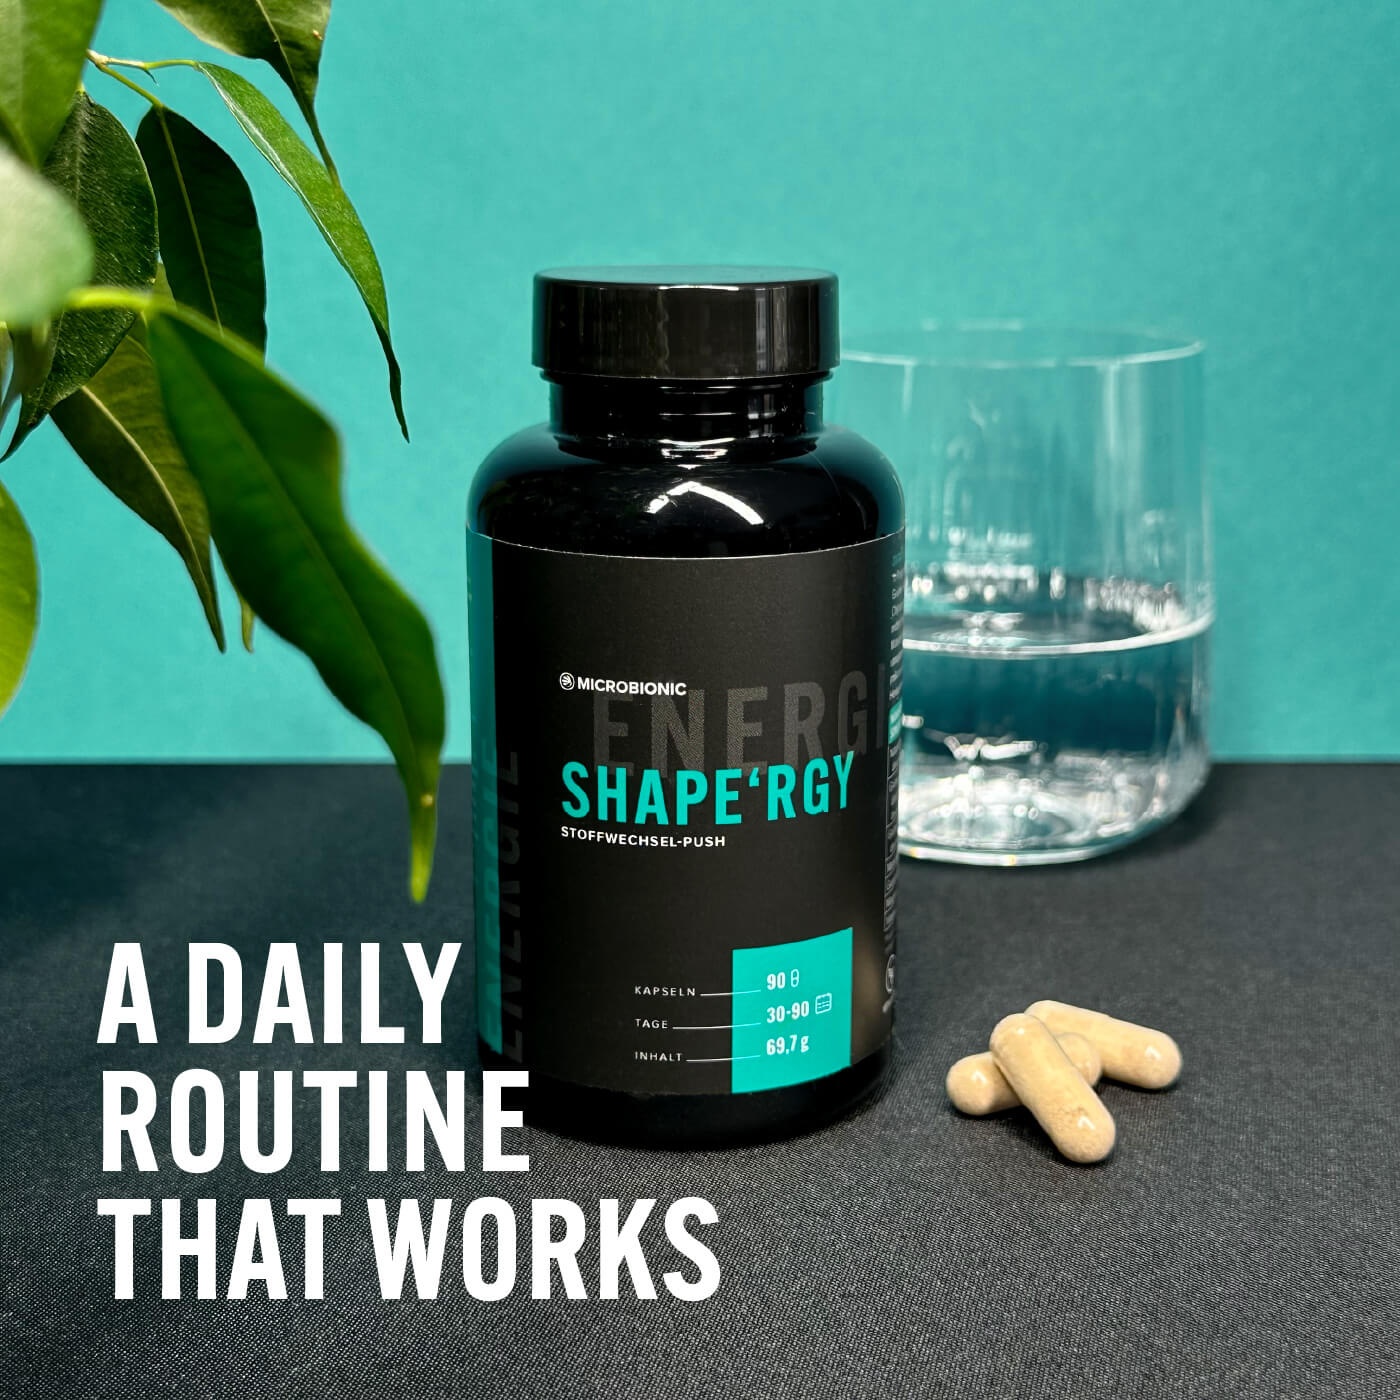 Shape'rgy – A Daily Routine That Works